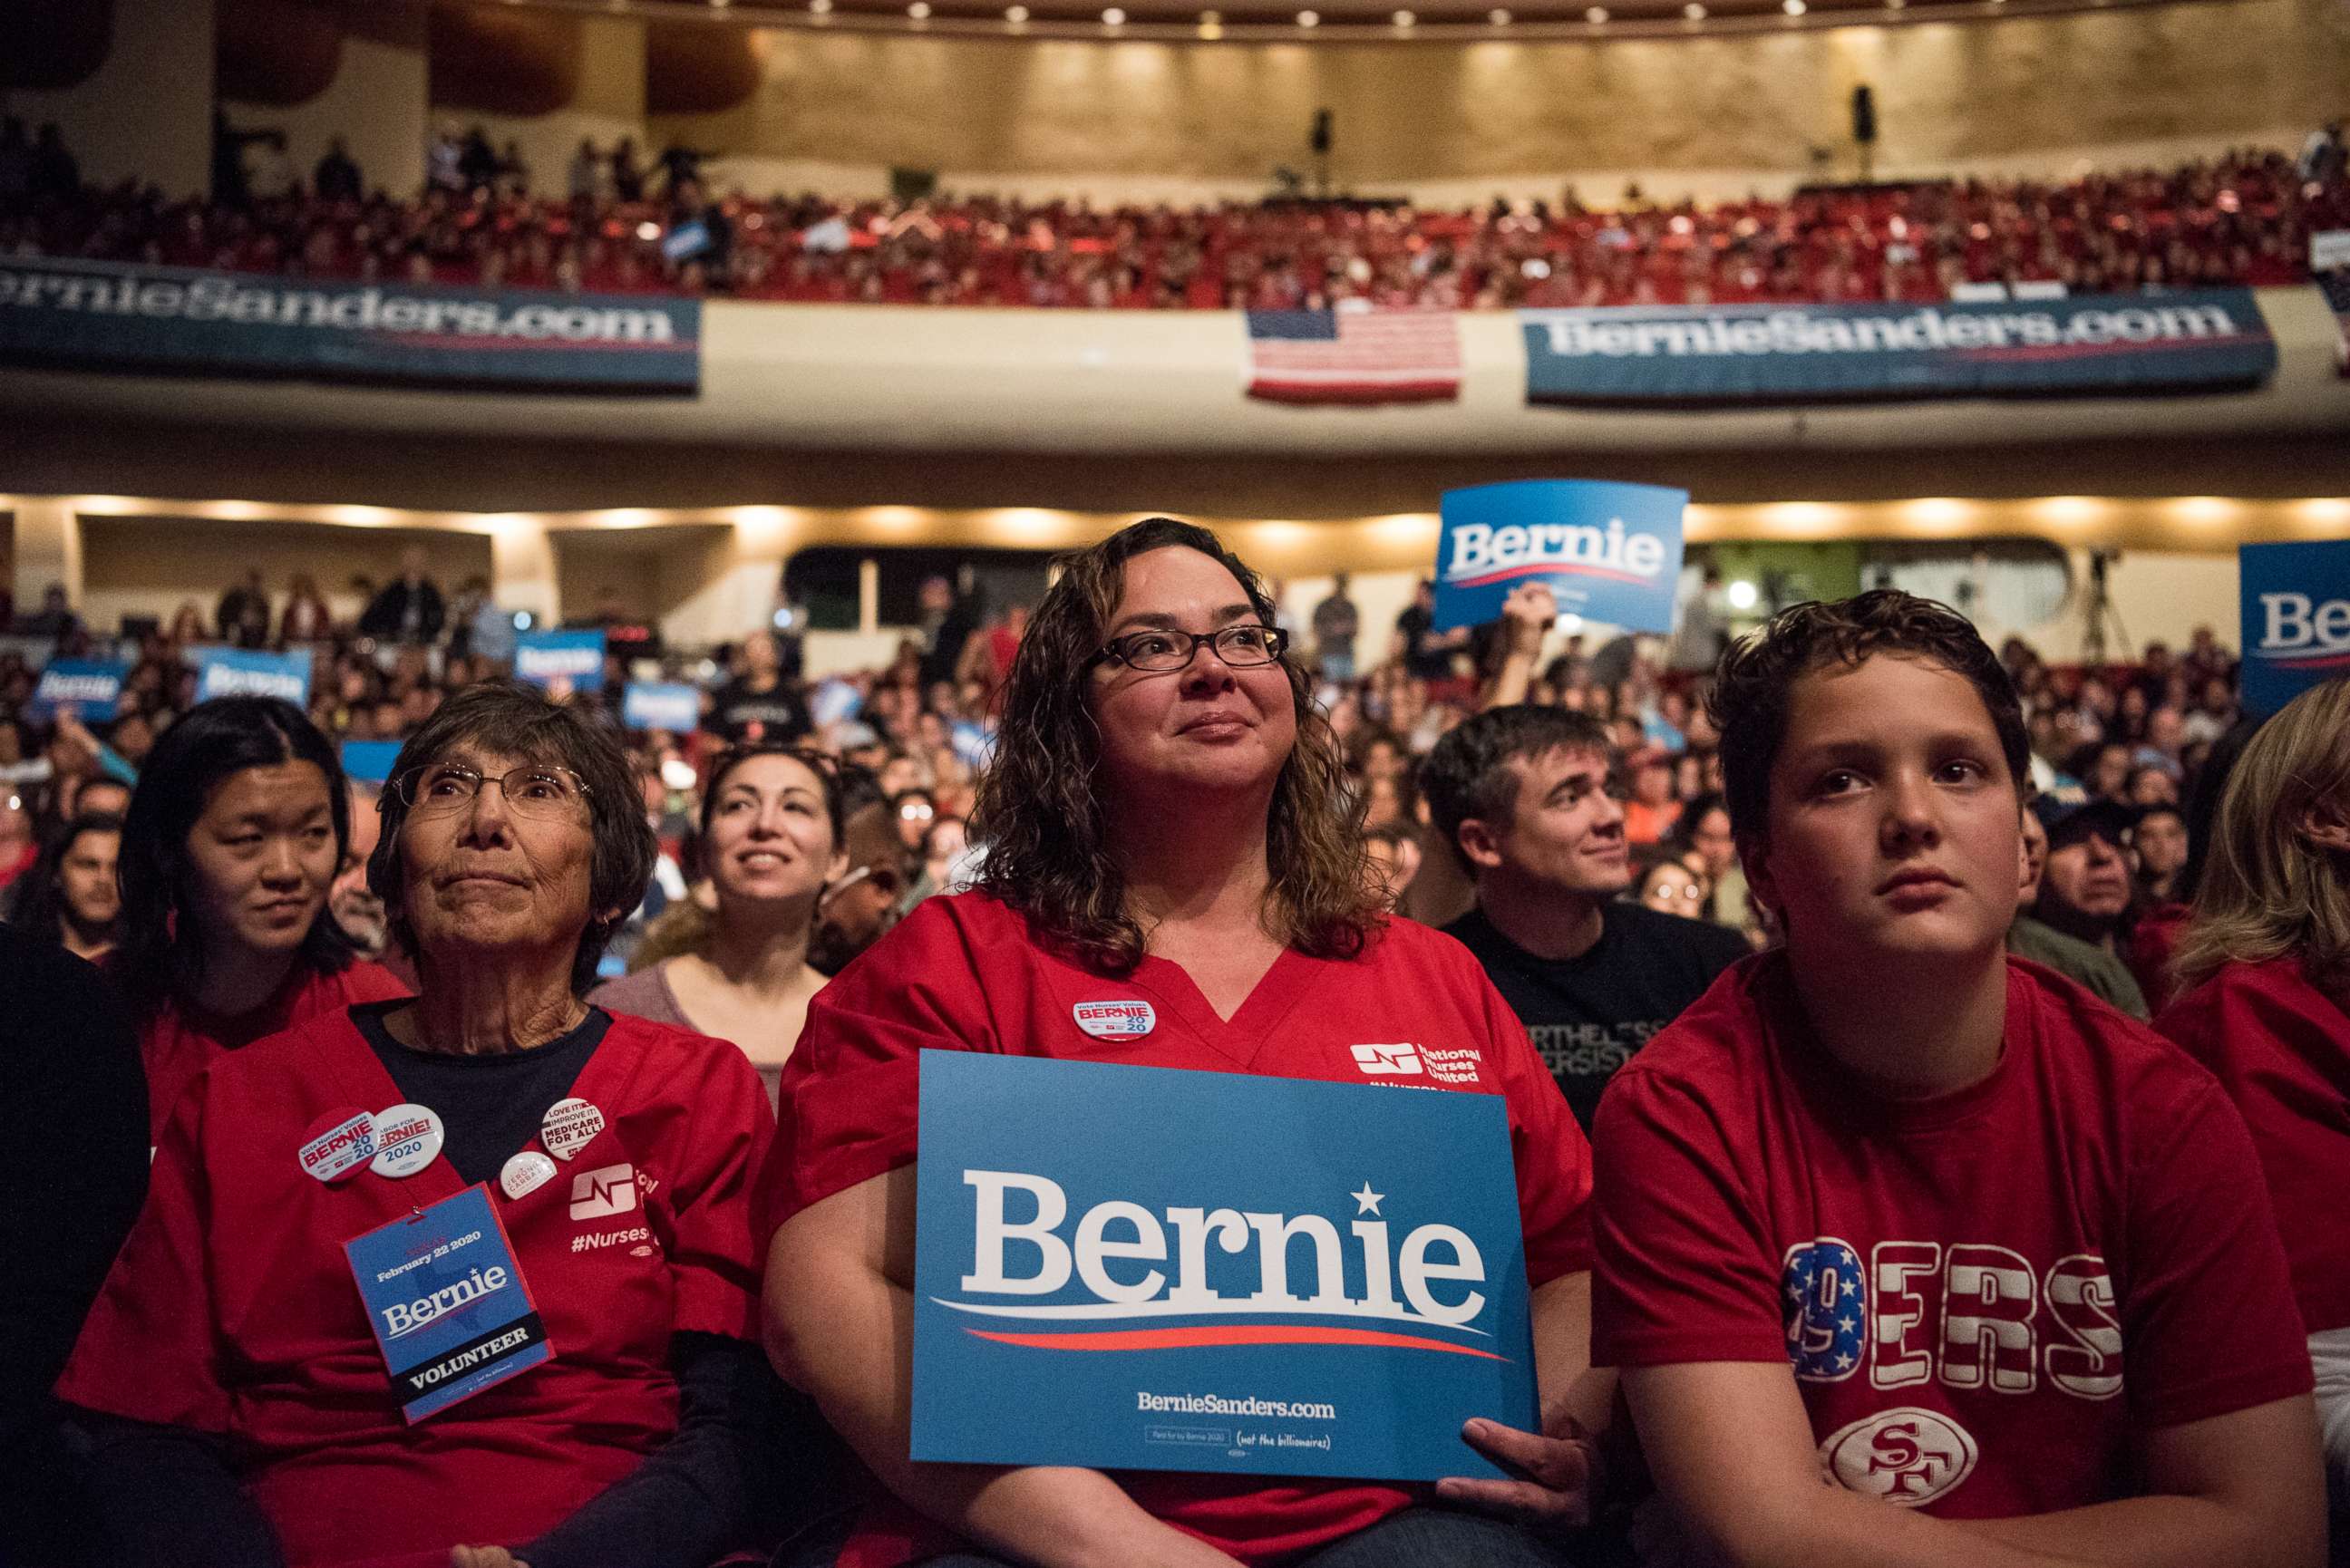 PHOTO: Elsie Reyes, 41, waits for democratic presidential candidate Sen. Bernie Sanders to take the stage during a campaign rally on Feb. 22, 2020 in El Paso, Texas.